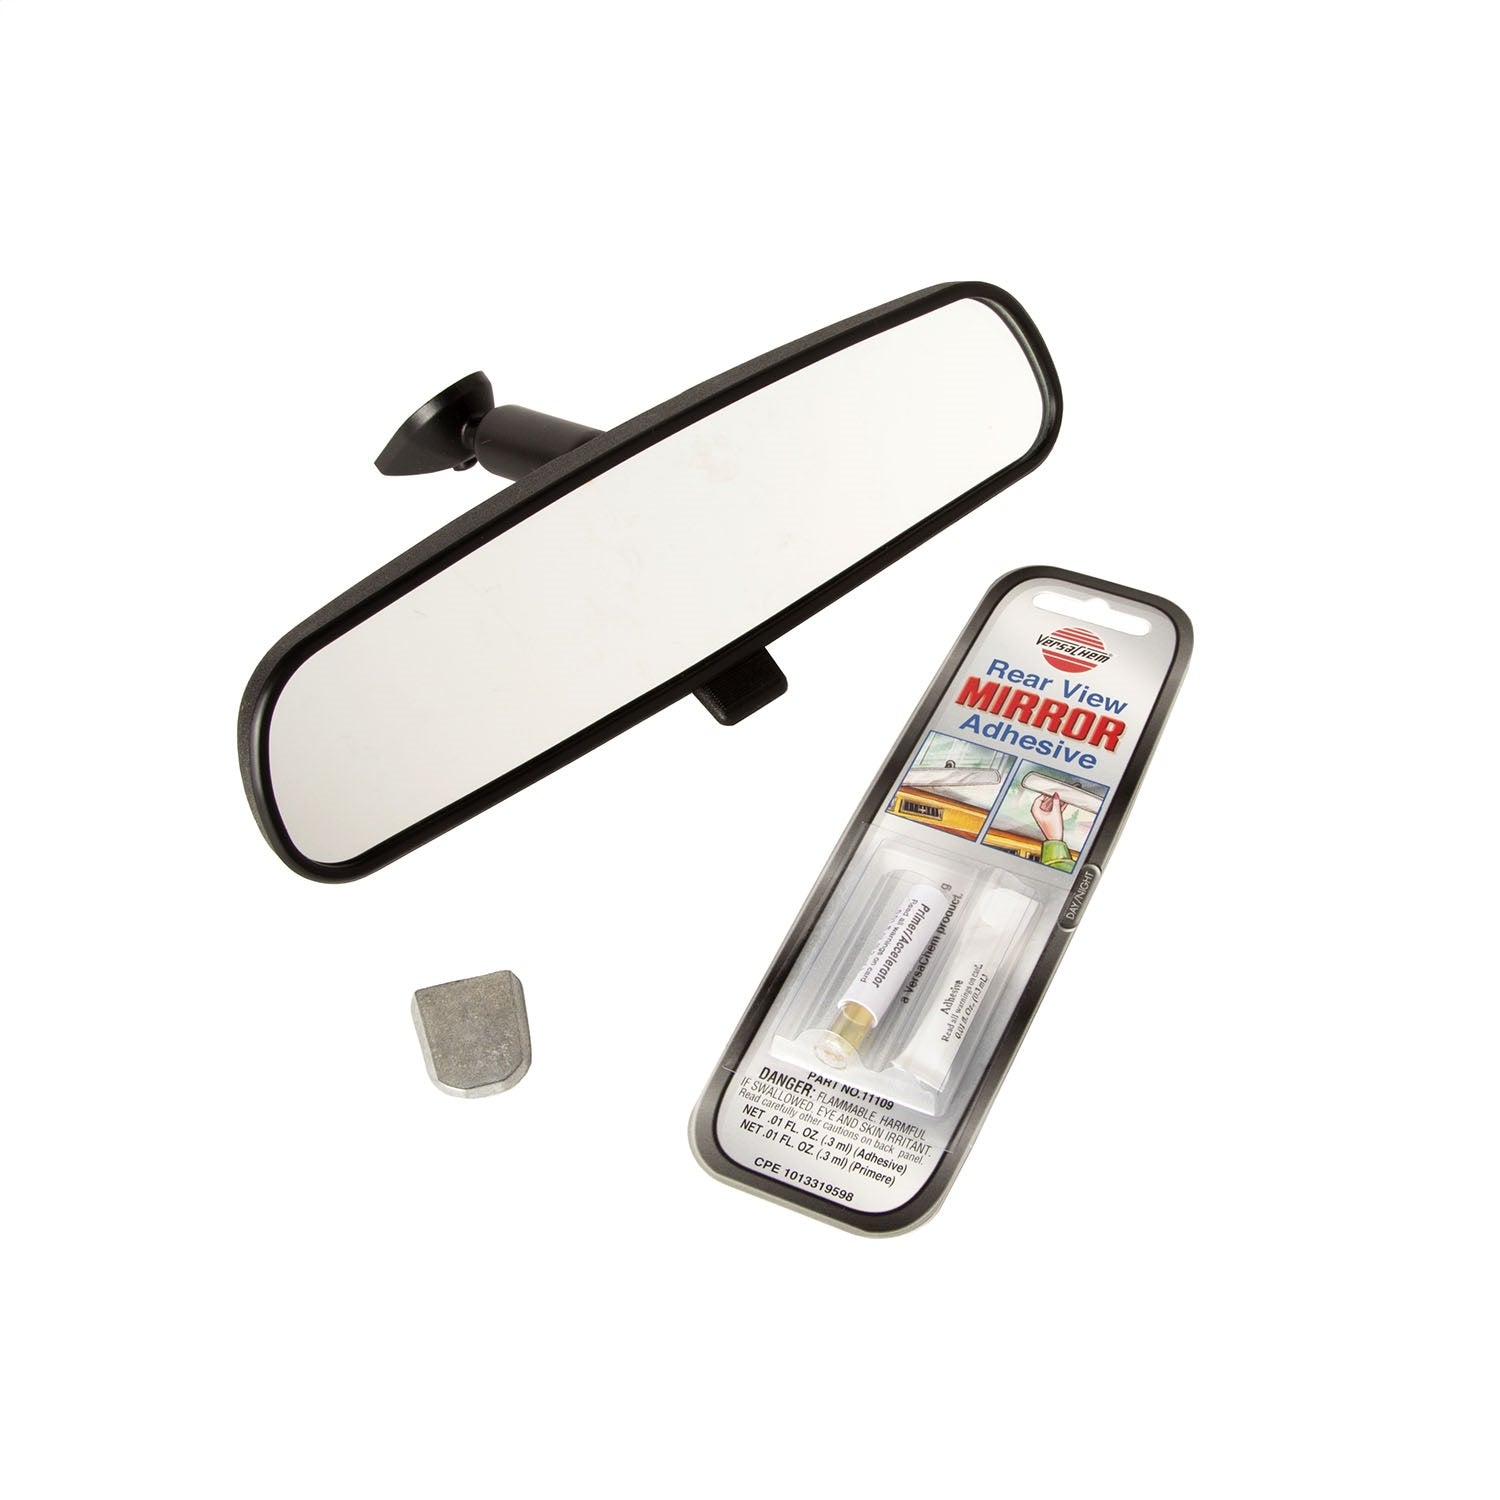 Omix 11020.02 Rear View Mirror Mounting Kit